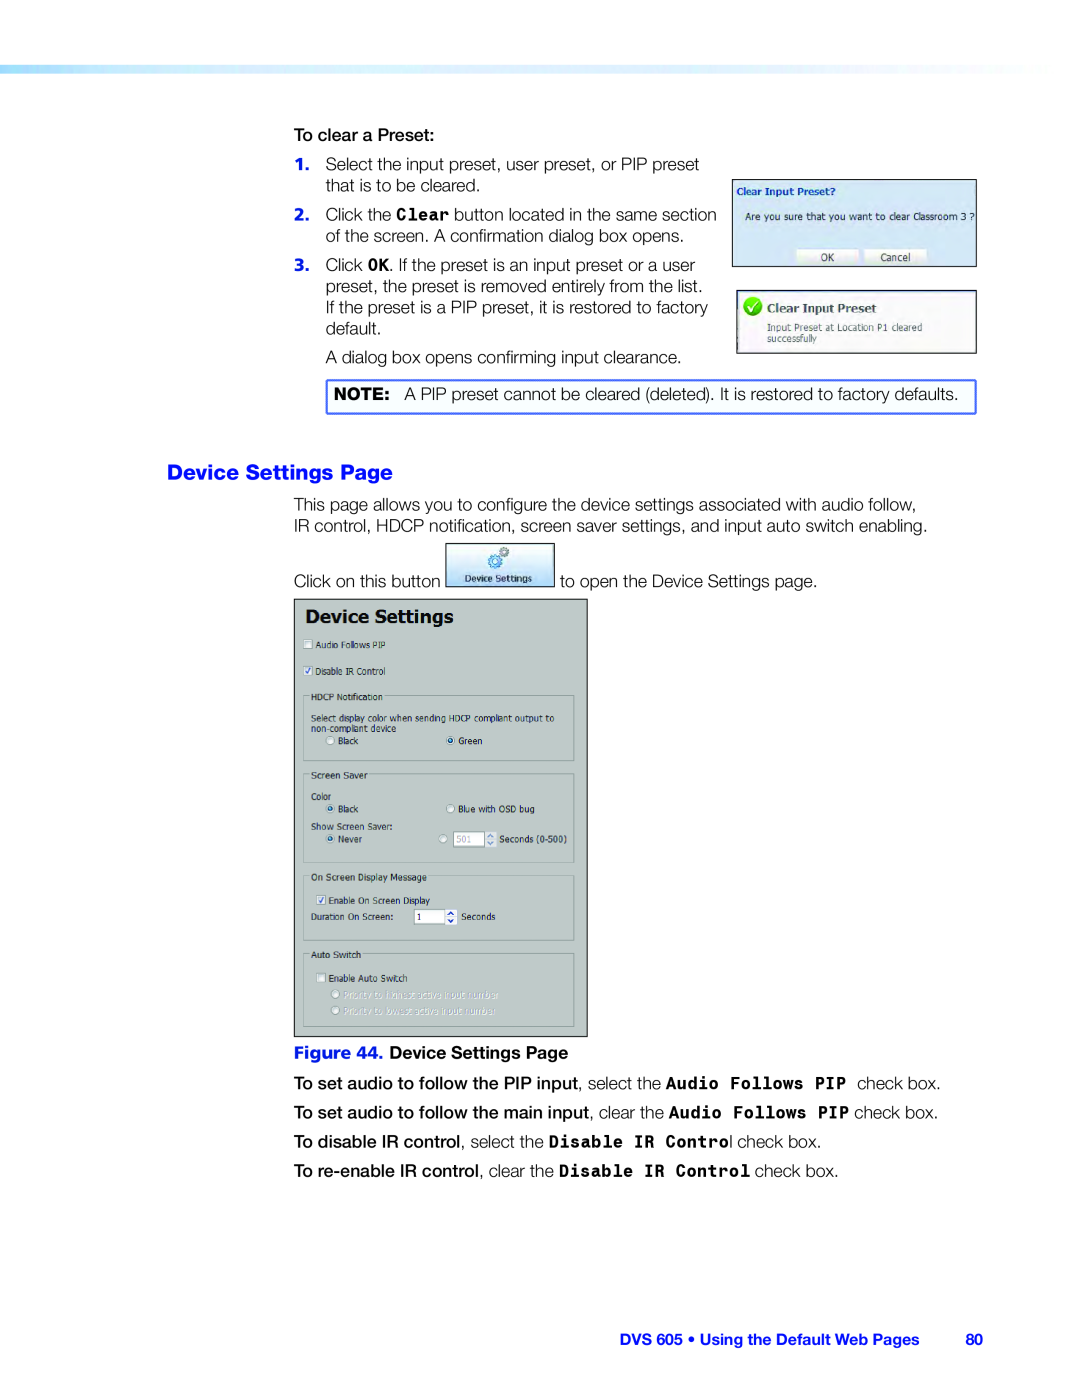 Extron electronic DVS 605 manual Device Settings Page 